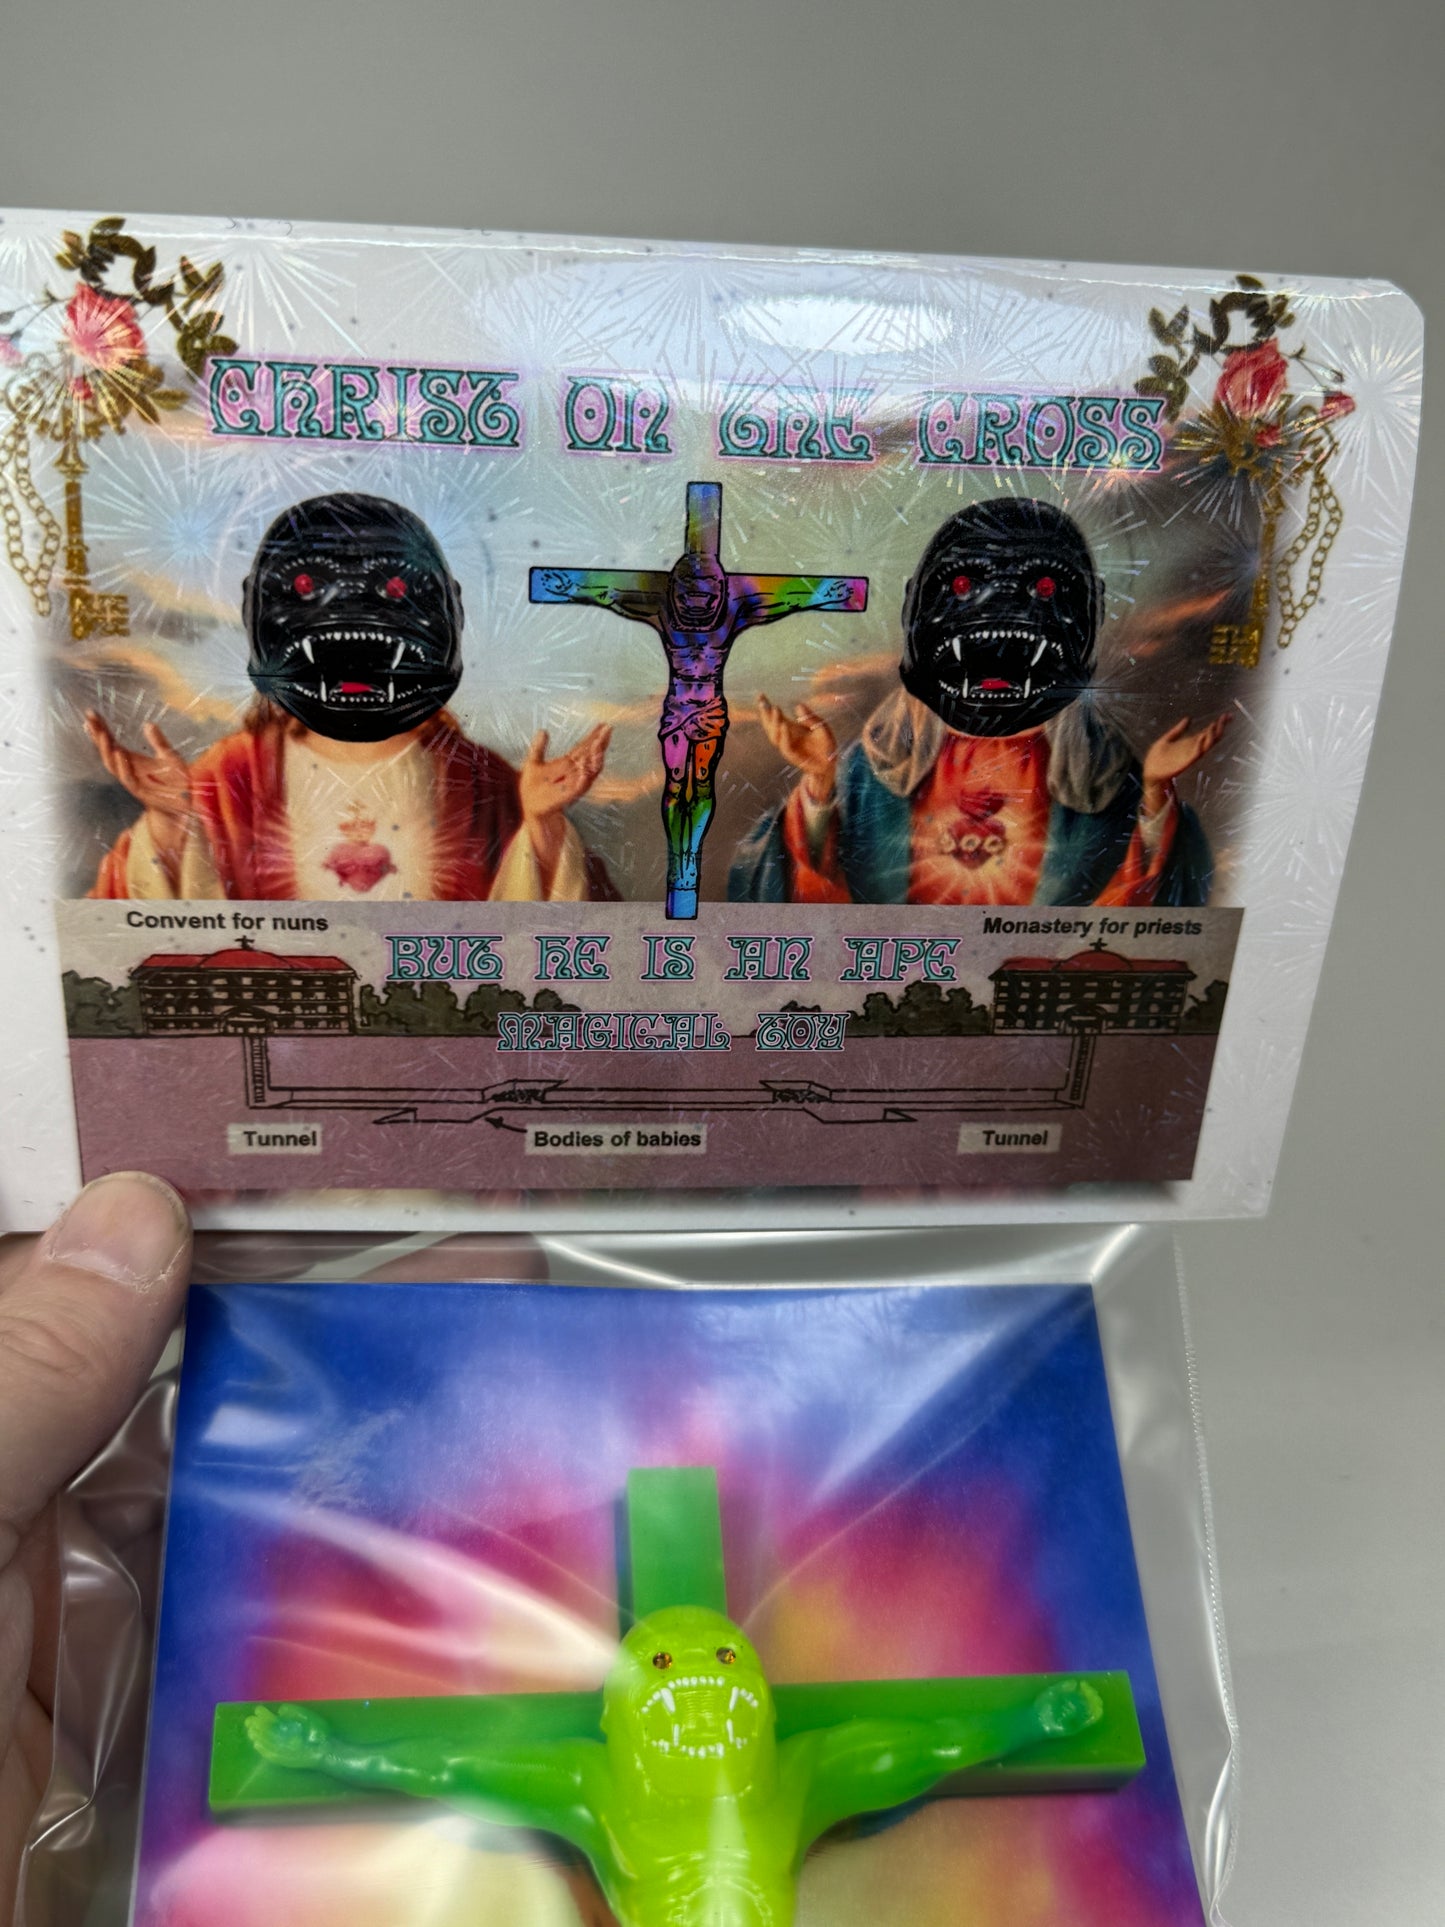 Christ on the Cross but he is an Ape, Magical Toy: Joy to You, Blessings from Space